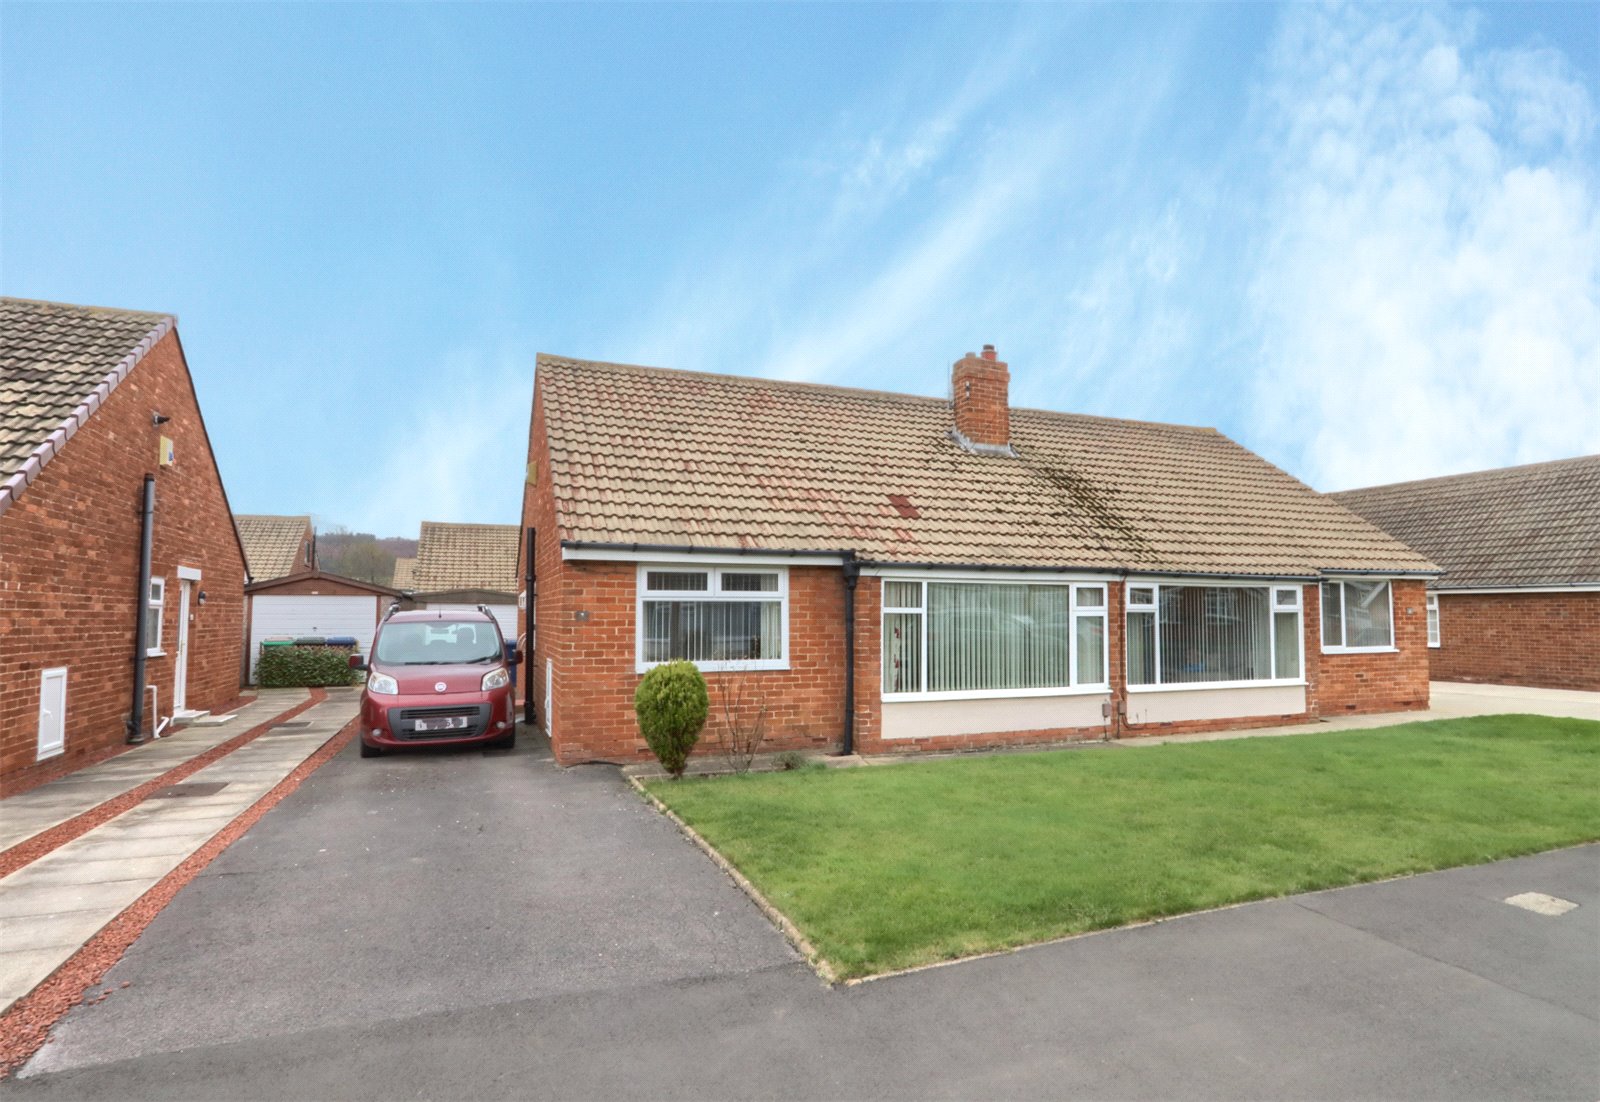 2 bed bungalow for sale in Falklands Close, Marske-by-the-Sea  - Property Image 1